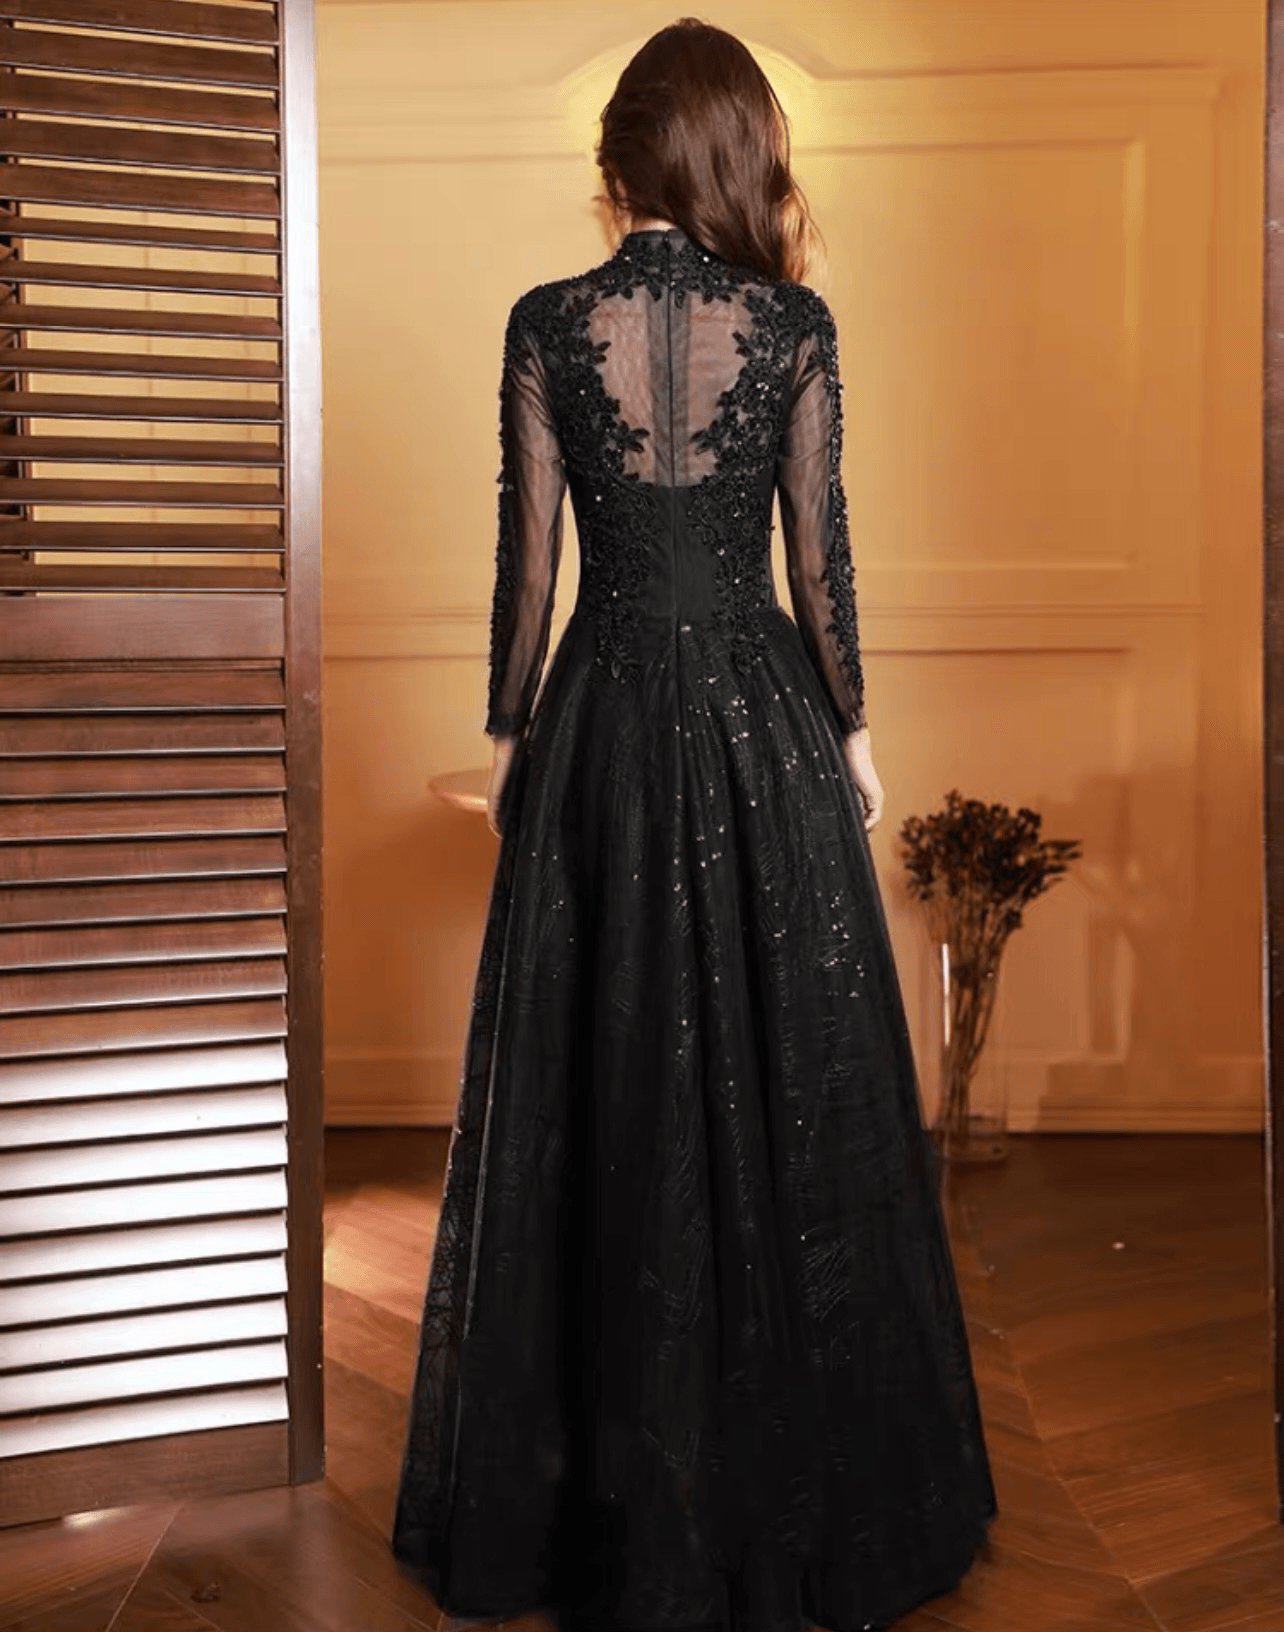 Stunning Black Lace Wedding Dress Women Beading Gothic African Dubai Ball  Gown Long Sleeve Puffy Br | Shopee Philippines